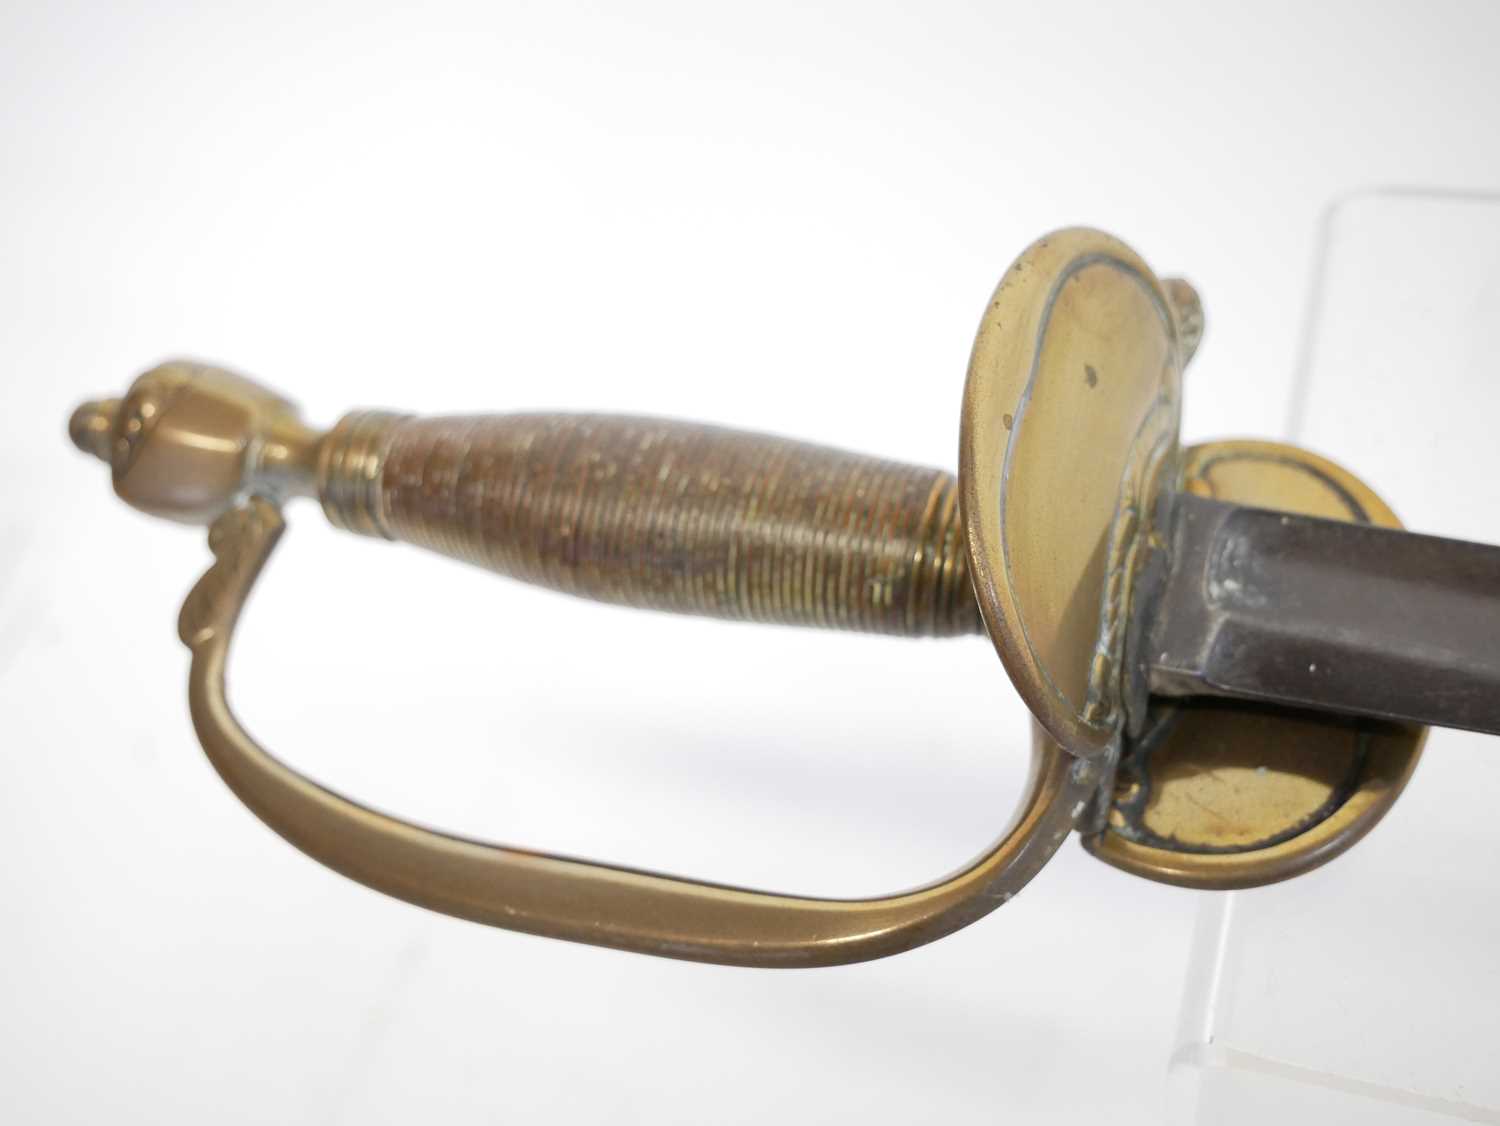 1796 pattern infantry officers sword, 32inch fullered blade, wire bound grip and folding guard. - Image 2 of 5